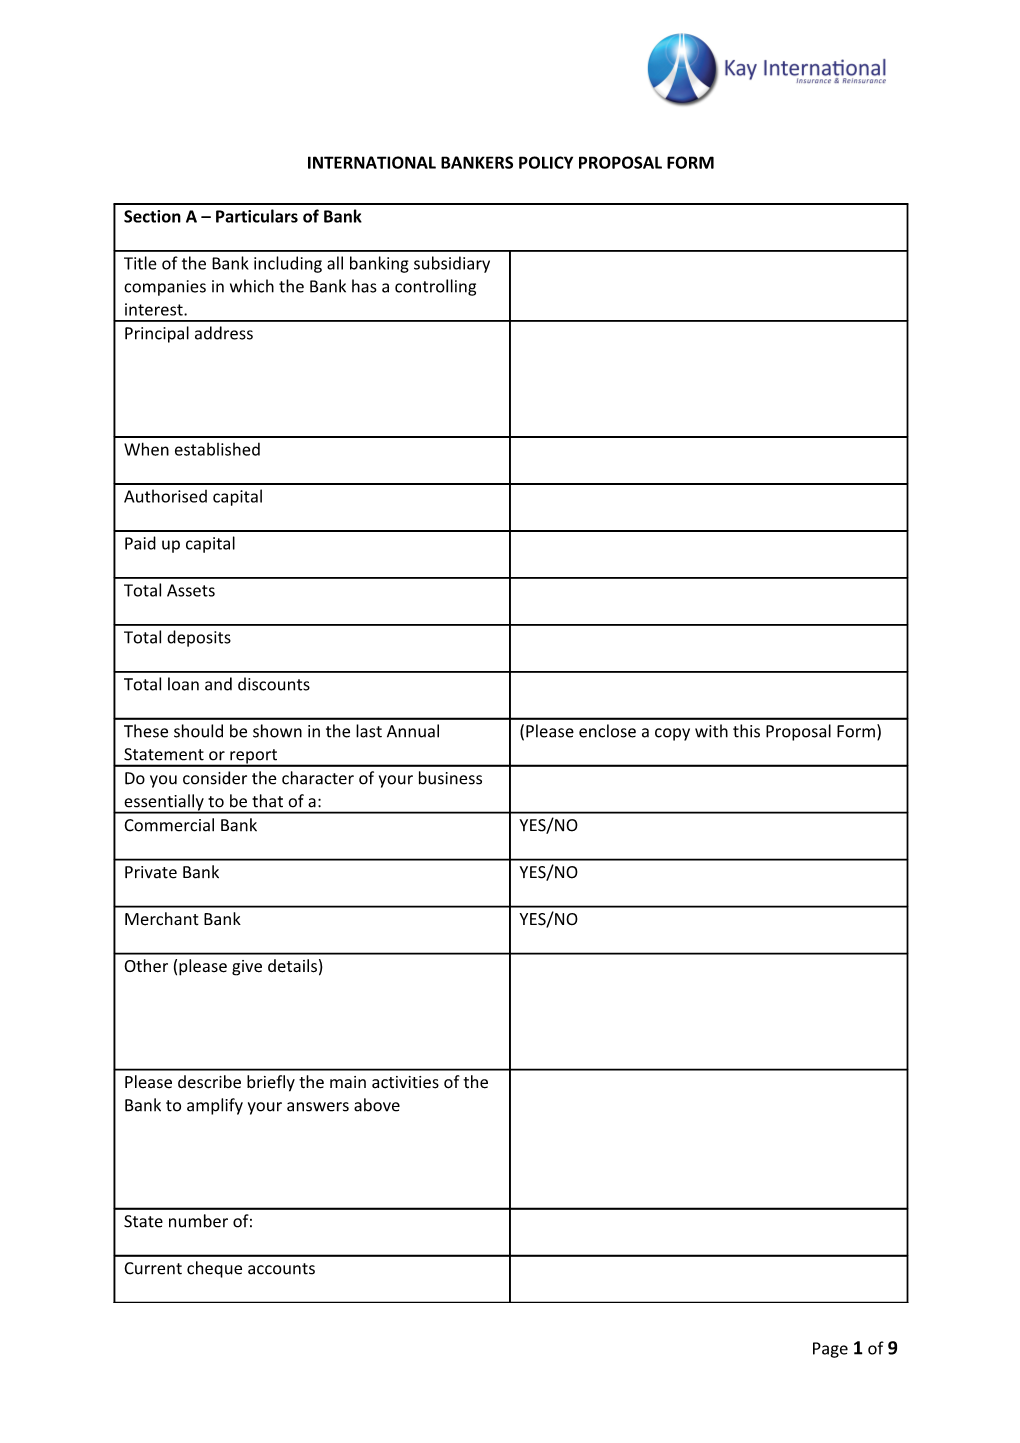 International Bankers Policy Proposal Form